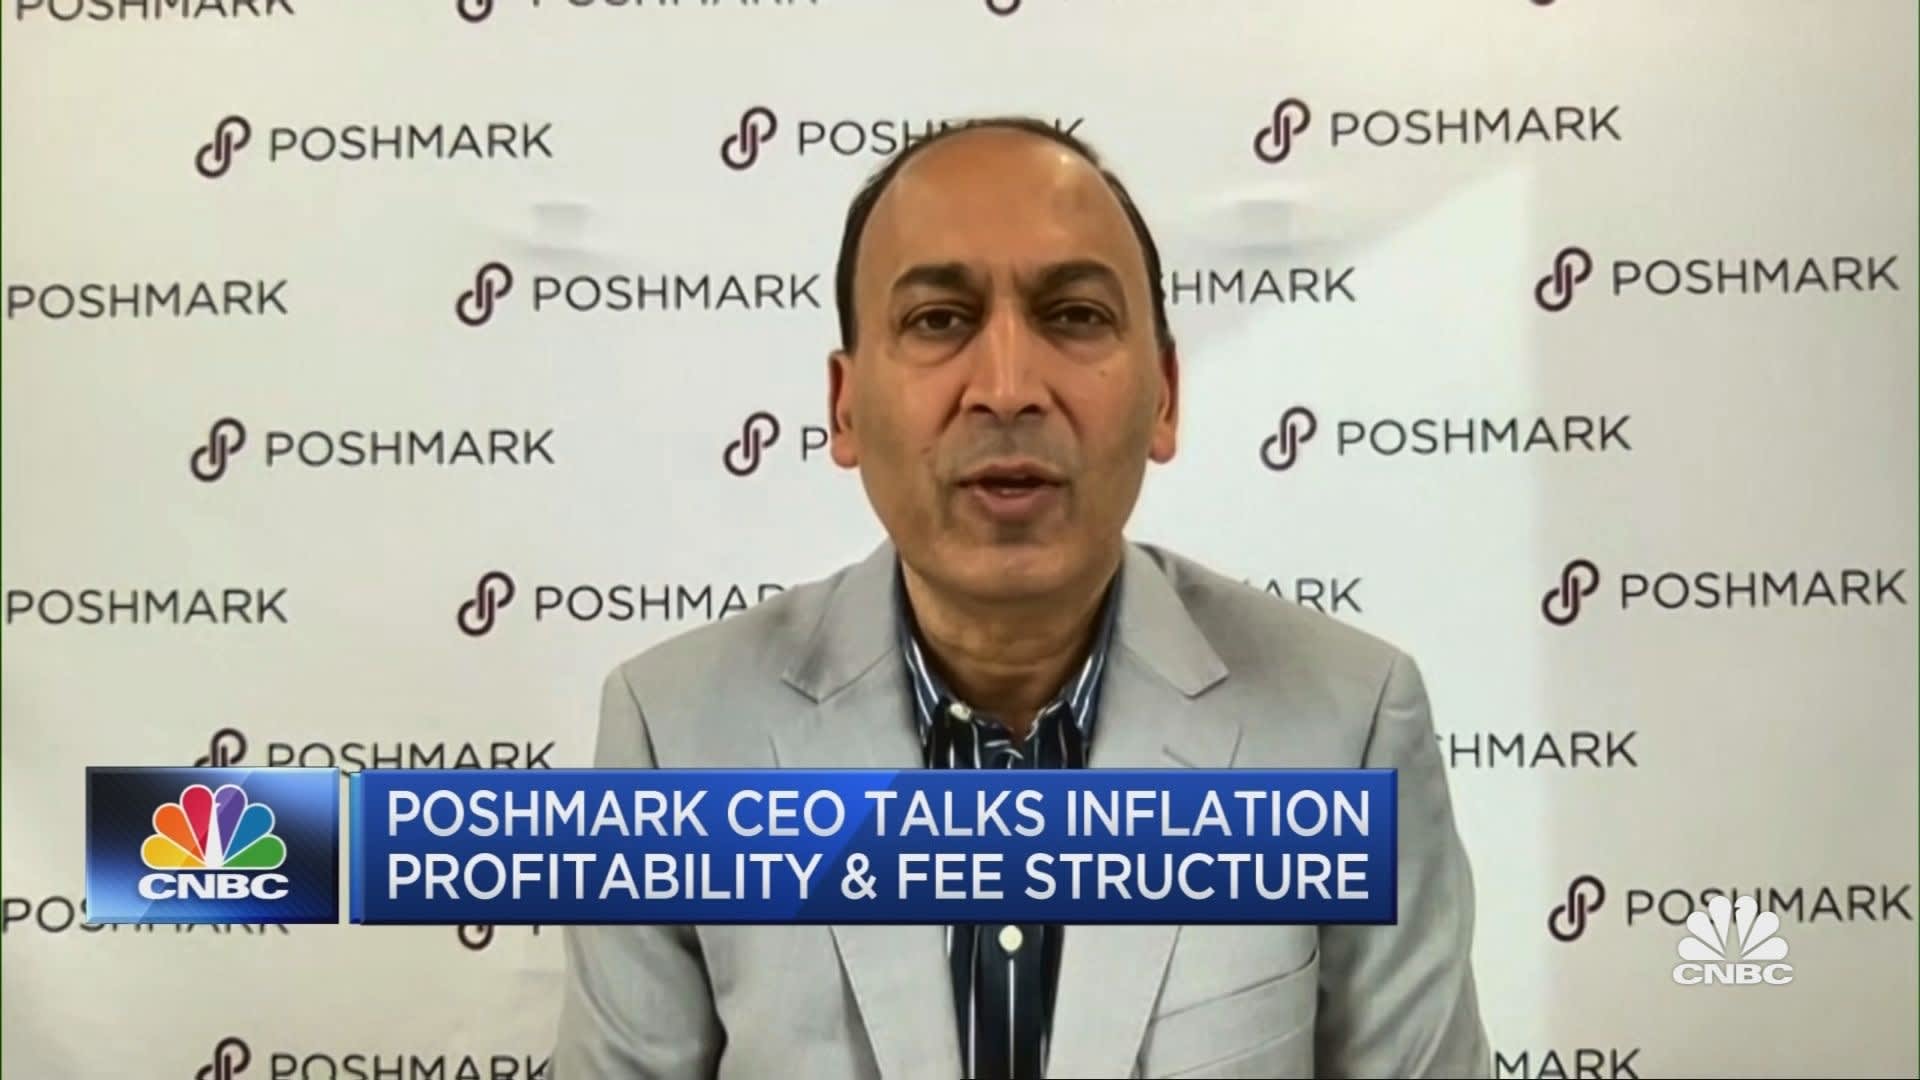 Poshmark CEO on resale market: We are still in the early innings and want to invest to grow